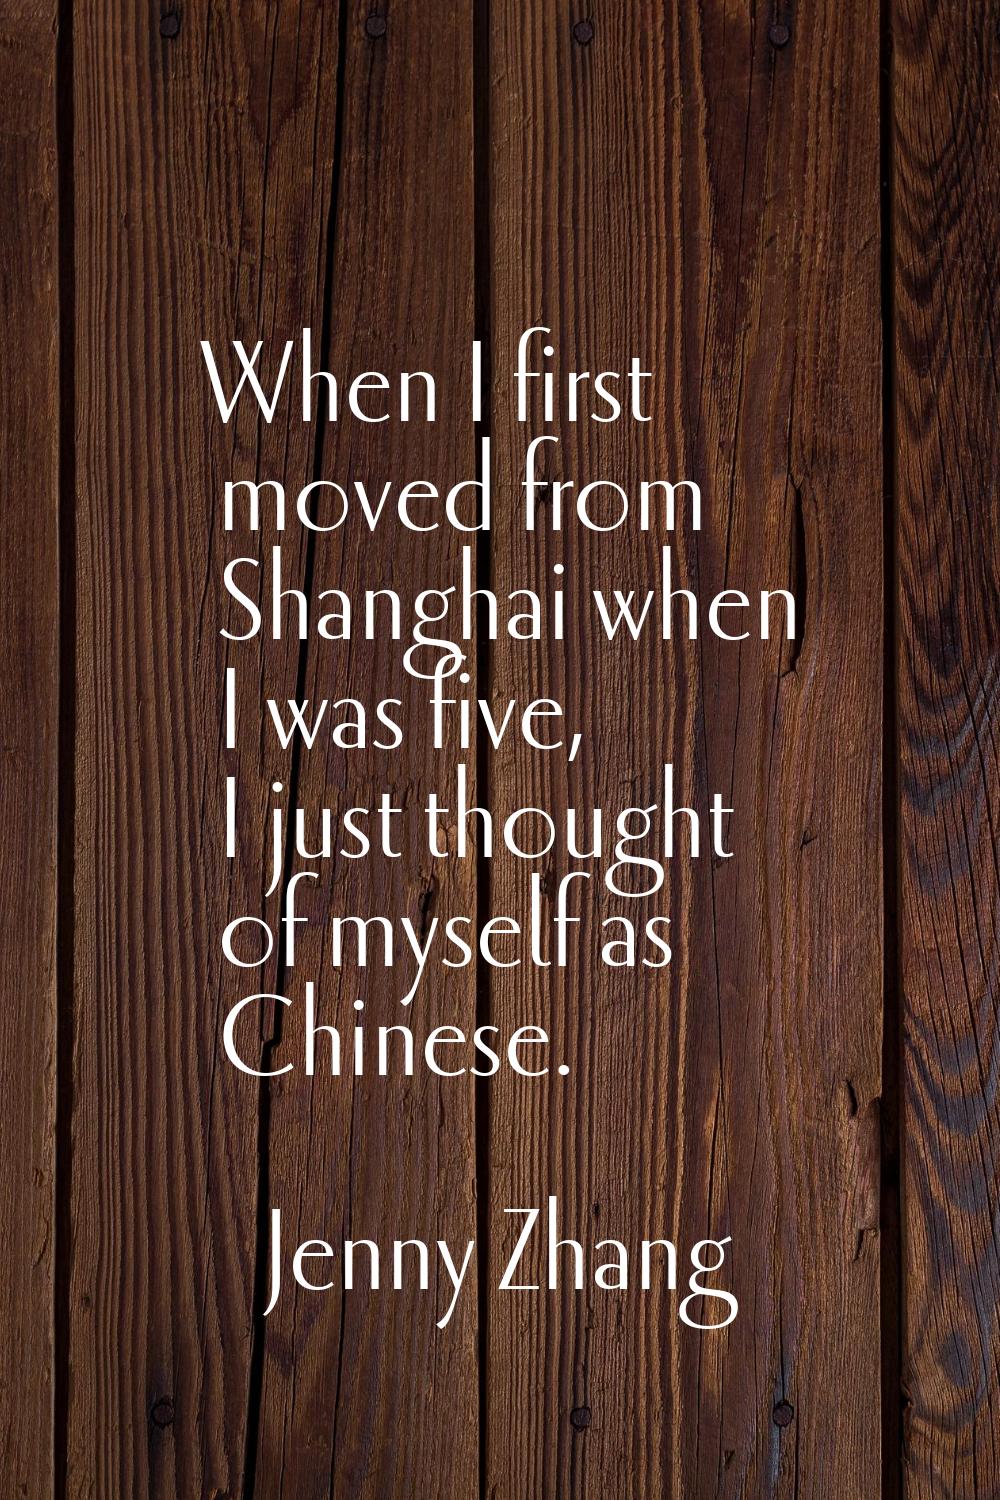 When I first moved from Shanghai when I was five, I just thought of myself as Chinese.